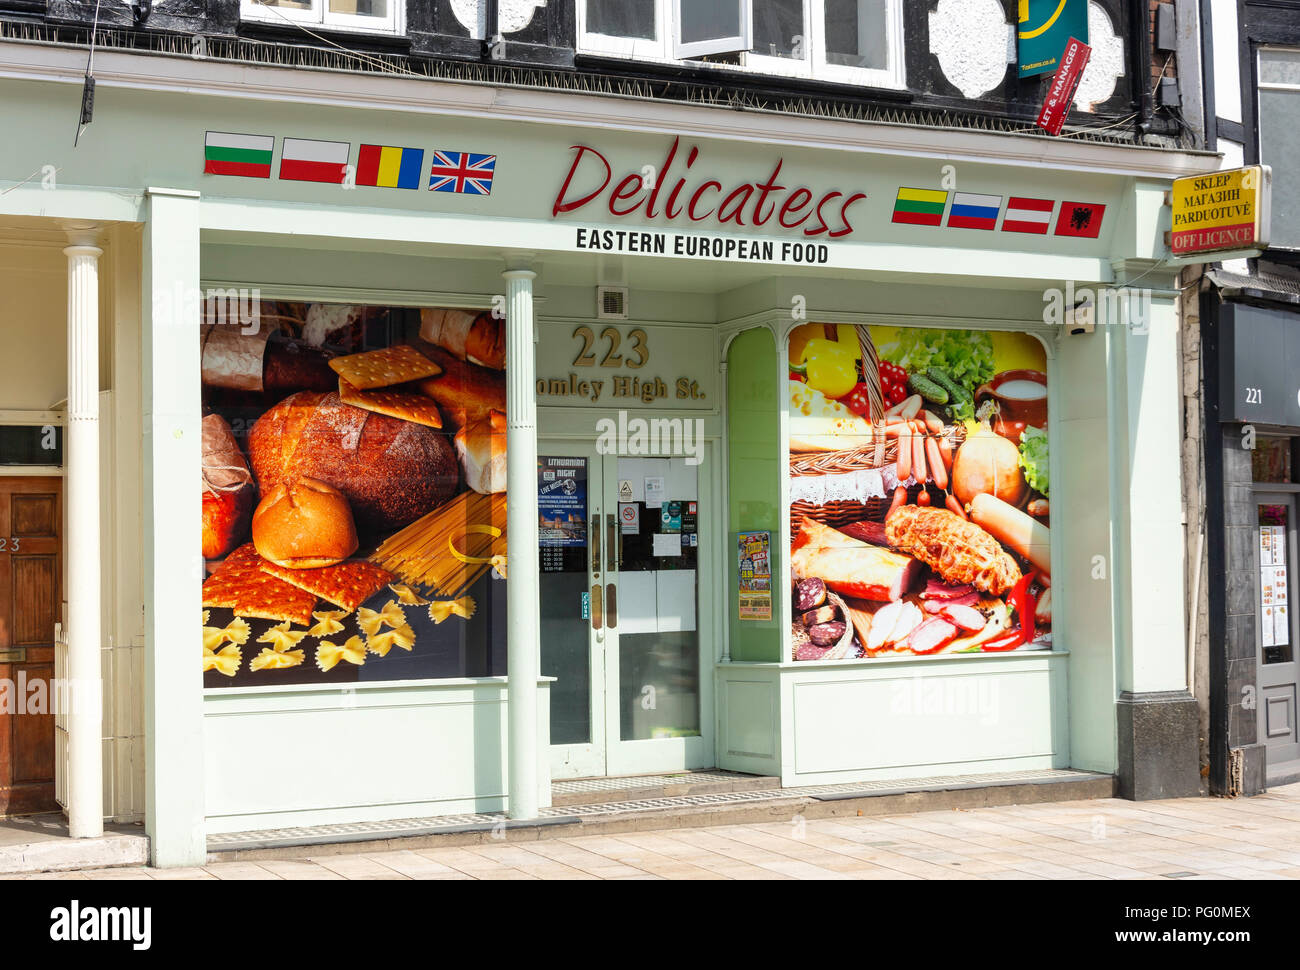 Delicates Eastern European Food store, High Street, Bromley, London Borough of Bromley, Greater London, England, United Kingdom Stock Photo